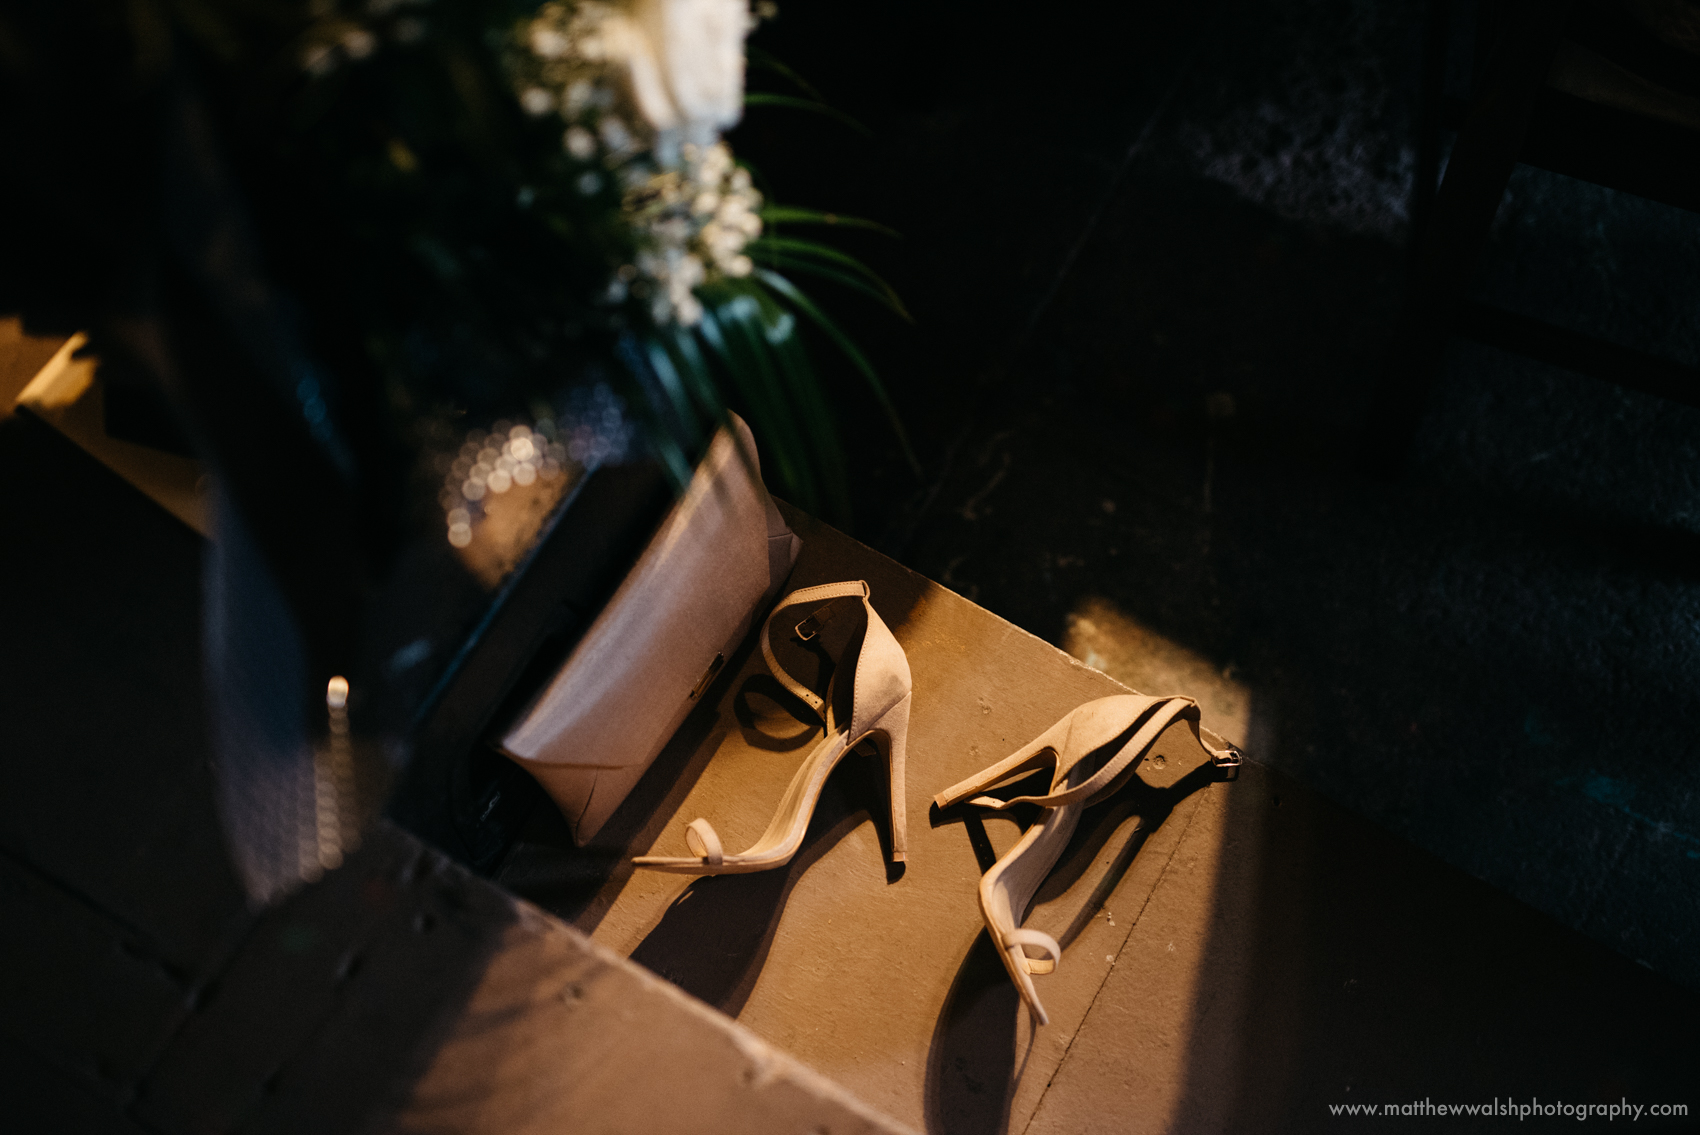 A detail of the brides shoes left on a step